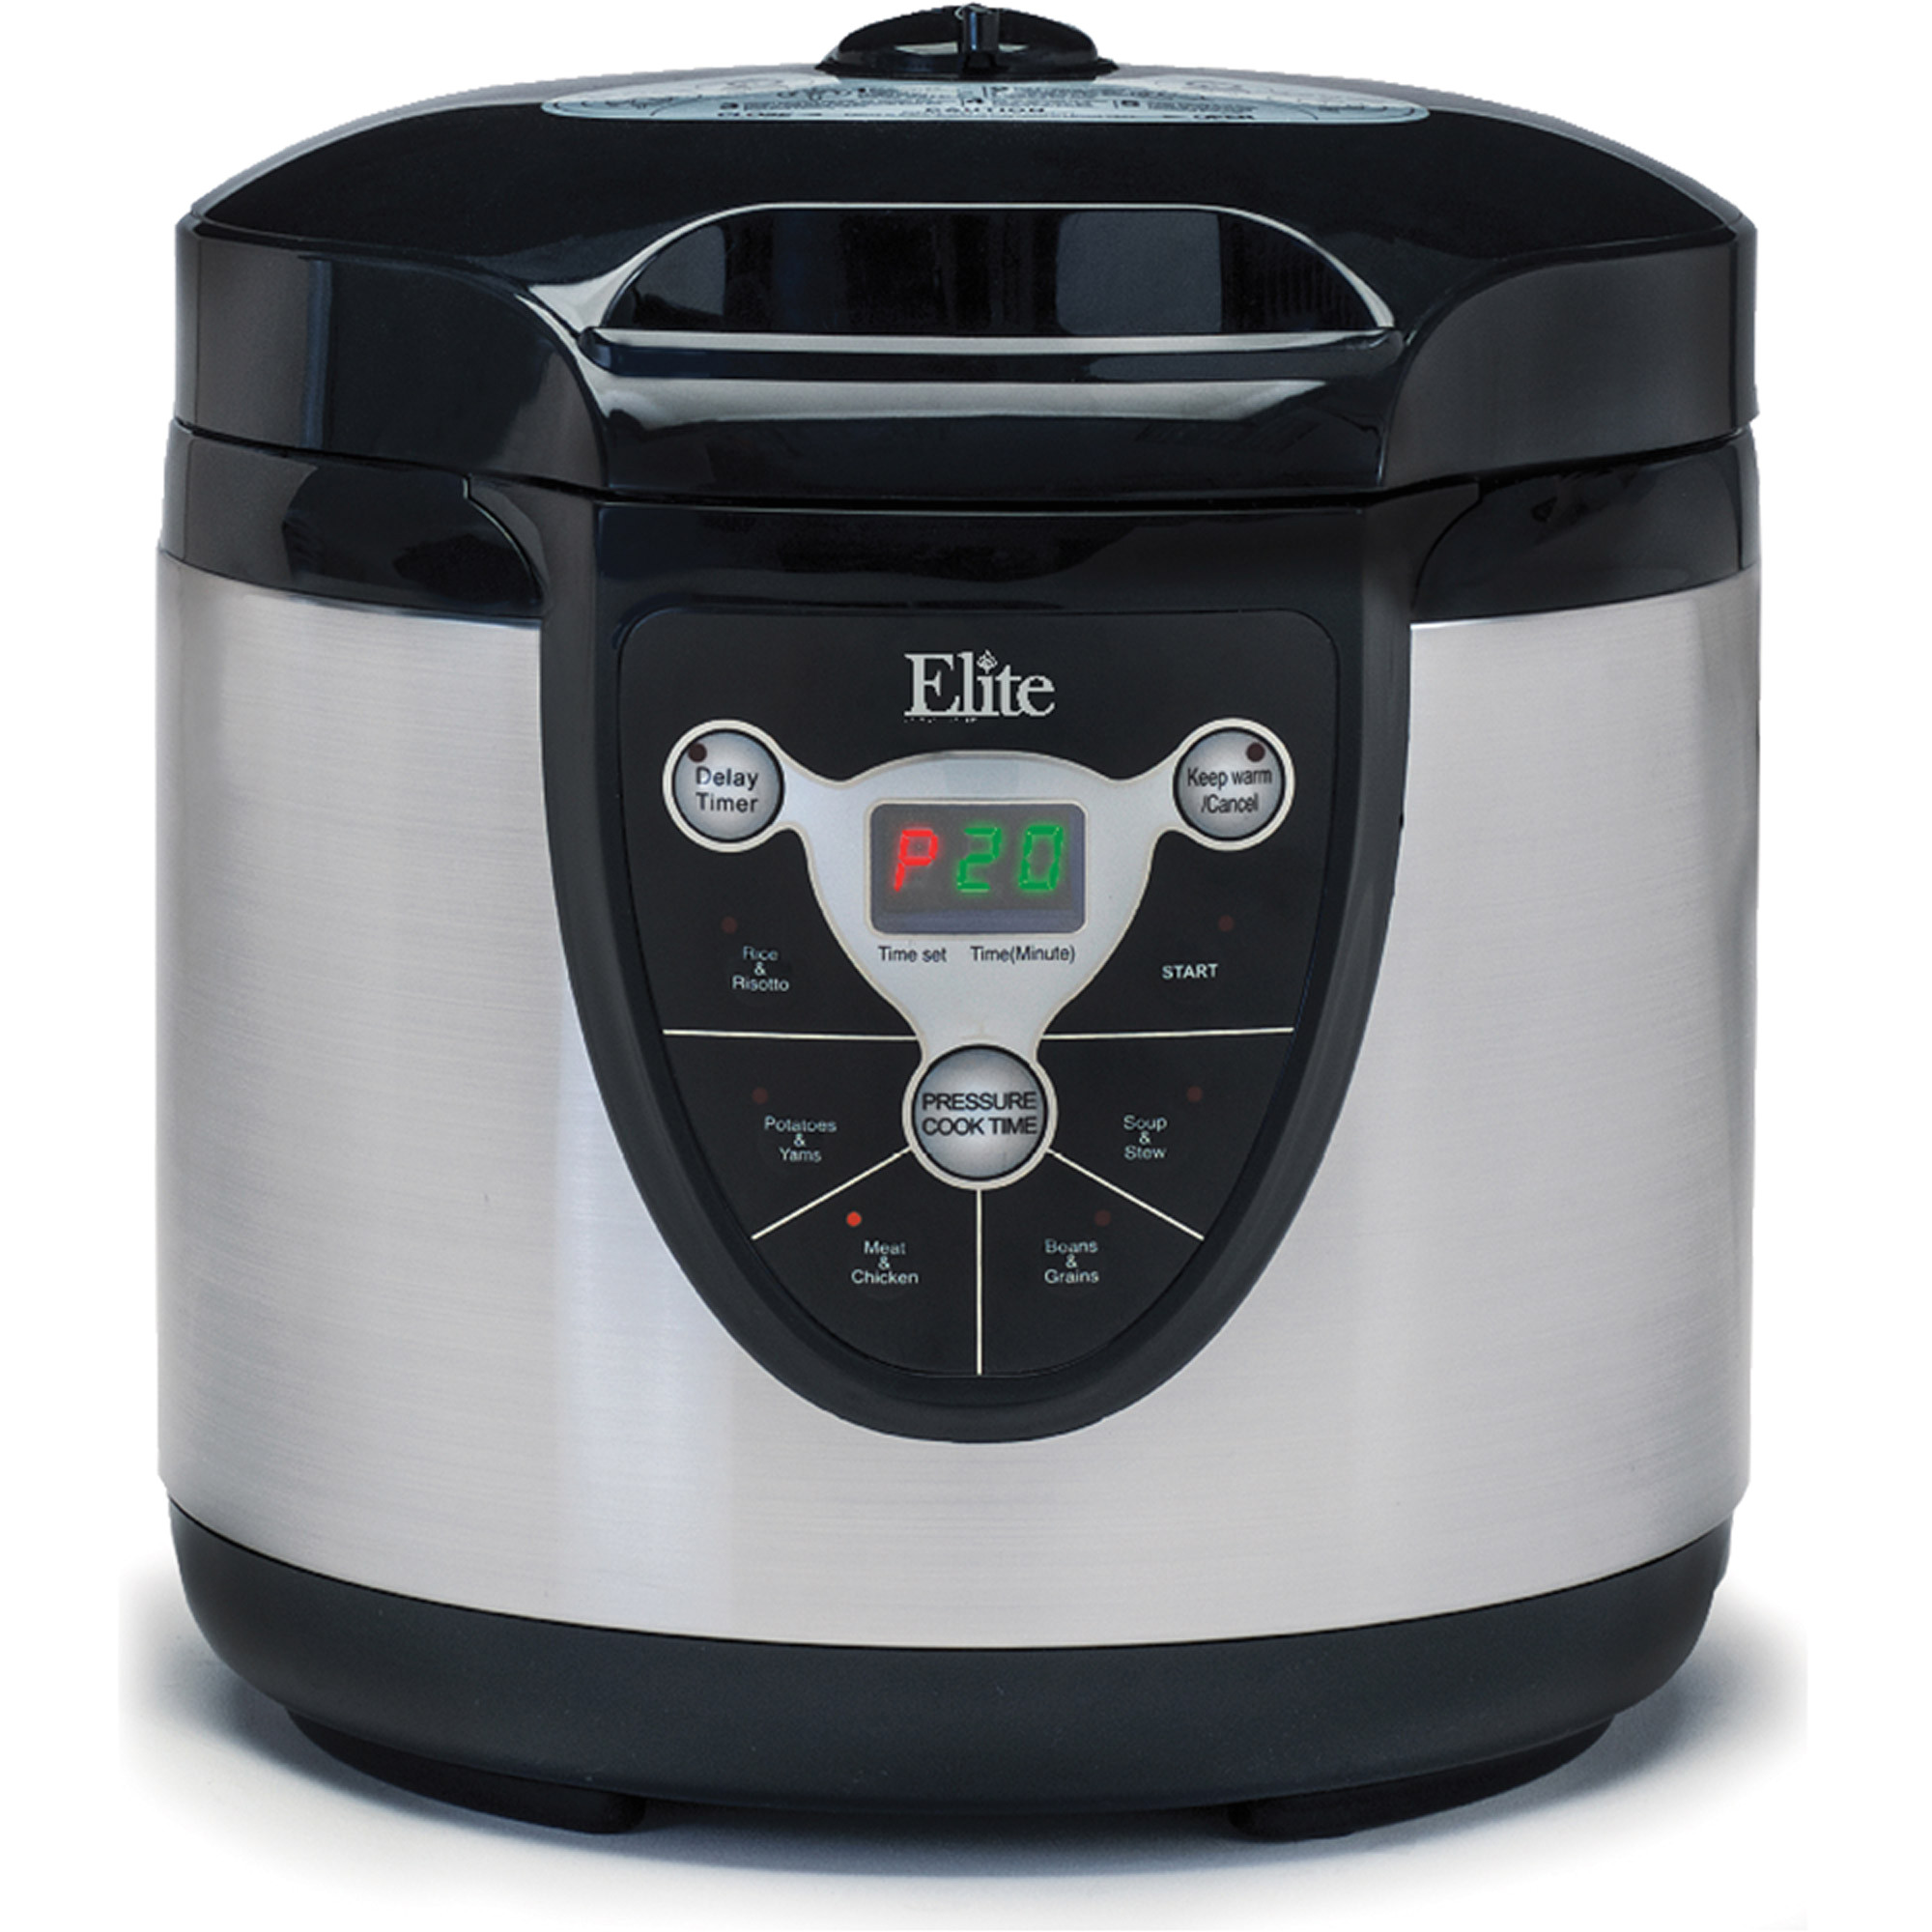 elite platinum epc 607 6 qt electric stainless steel pressure cooker with 6 functions walmart com